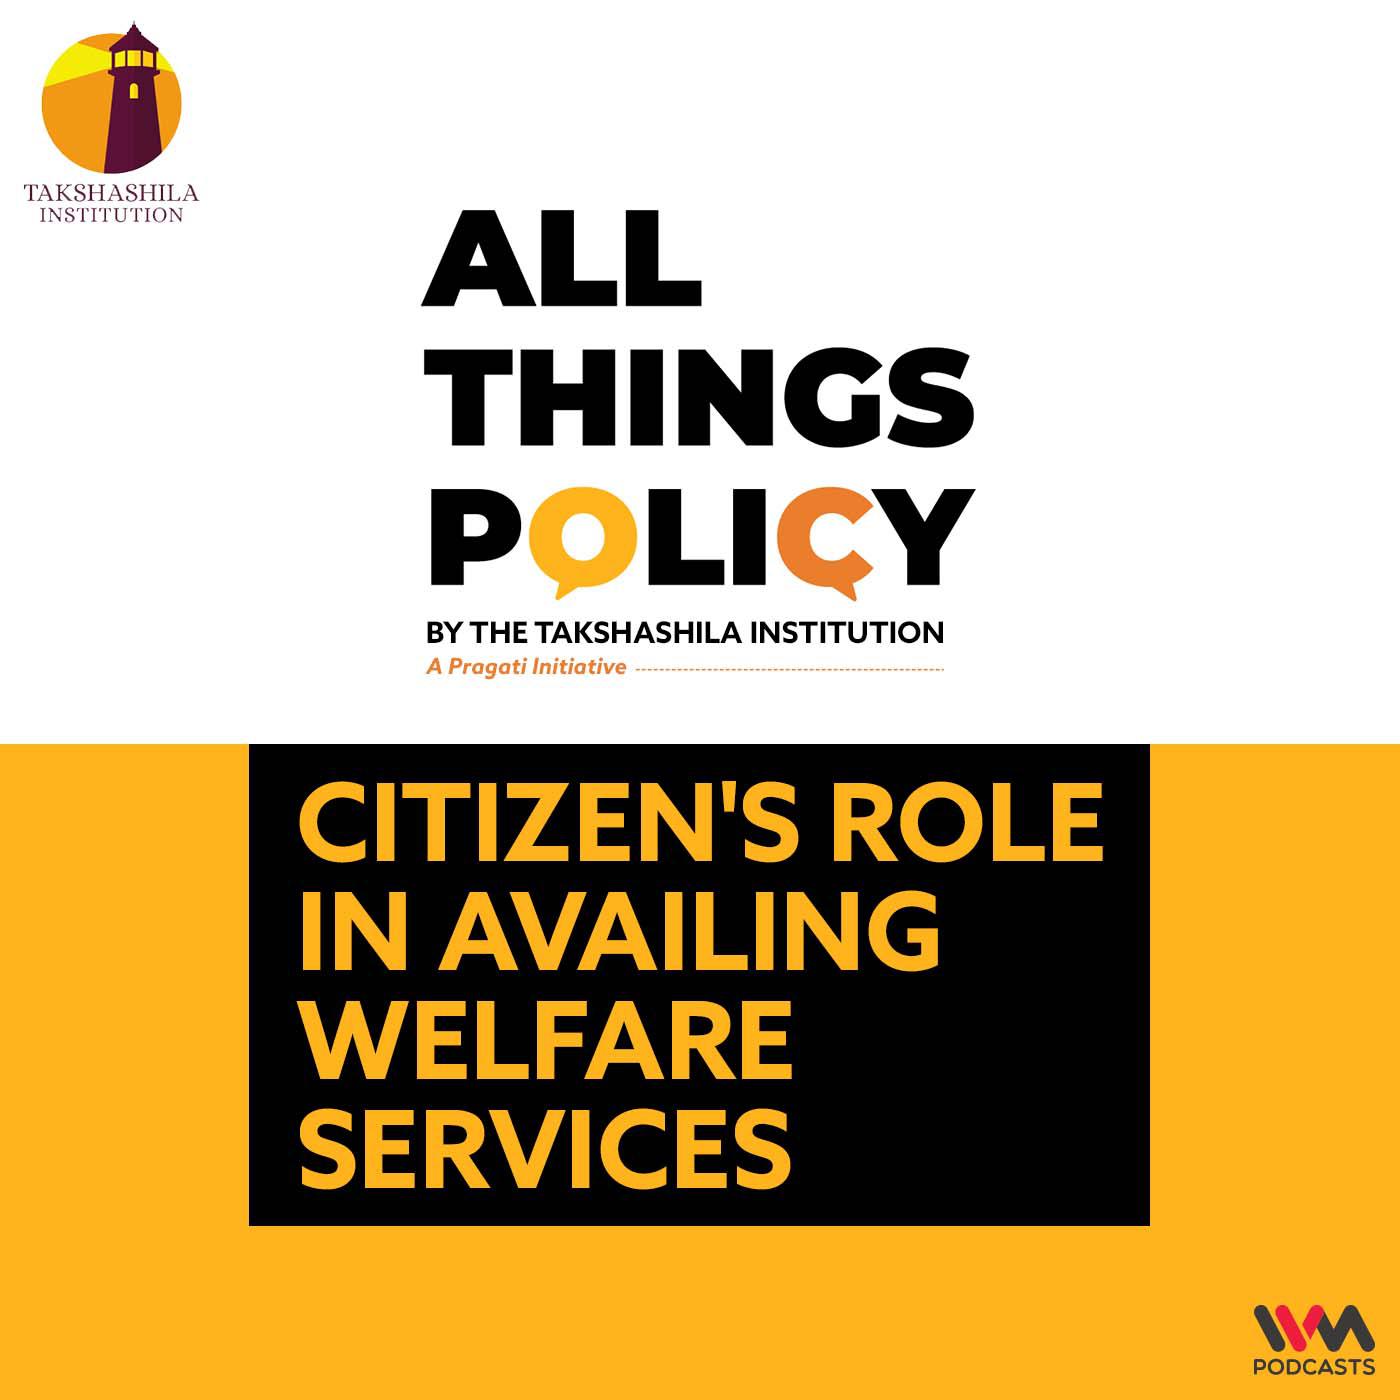 Citizen's Role in Availing Welfare Services